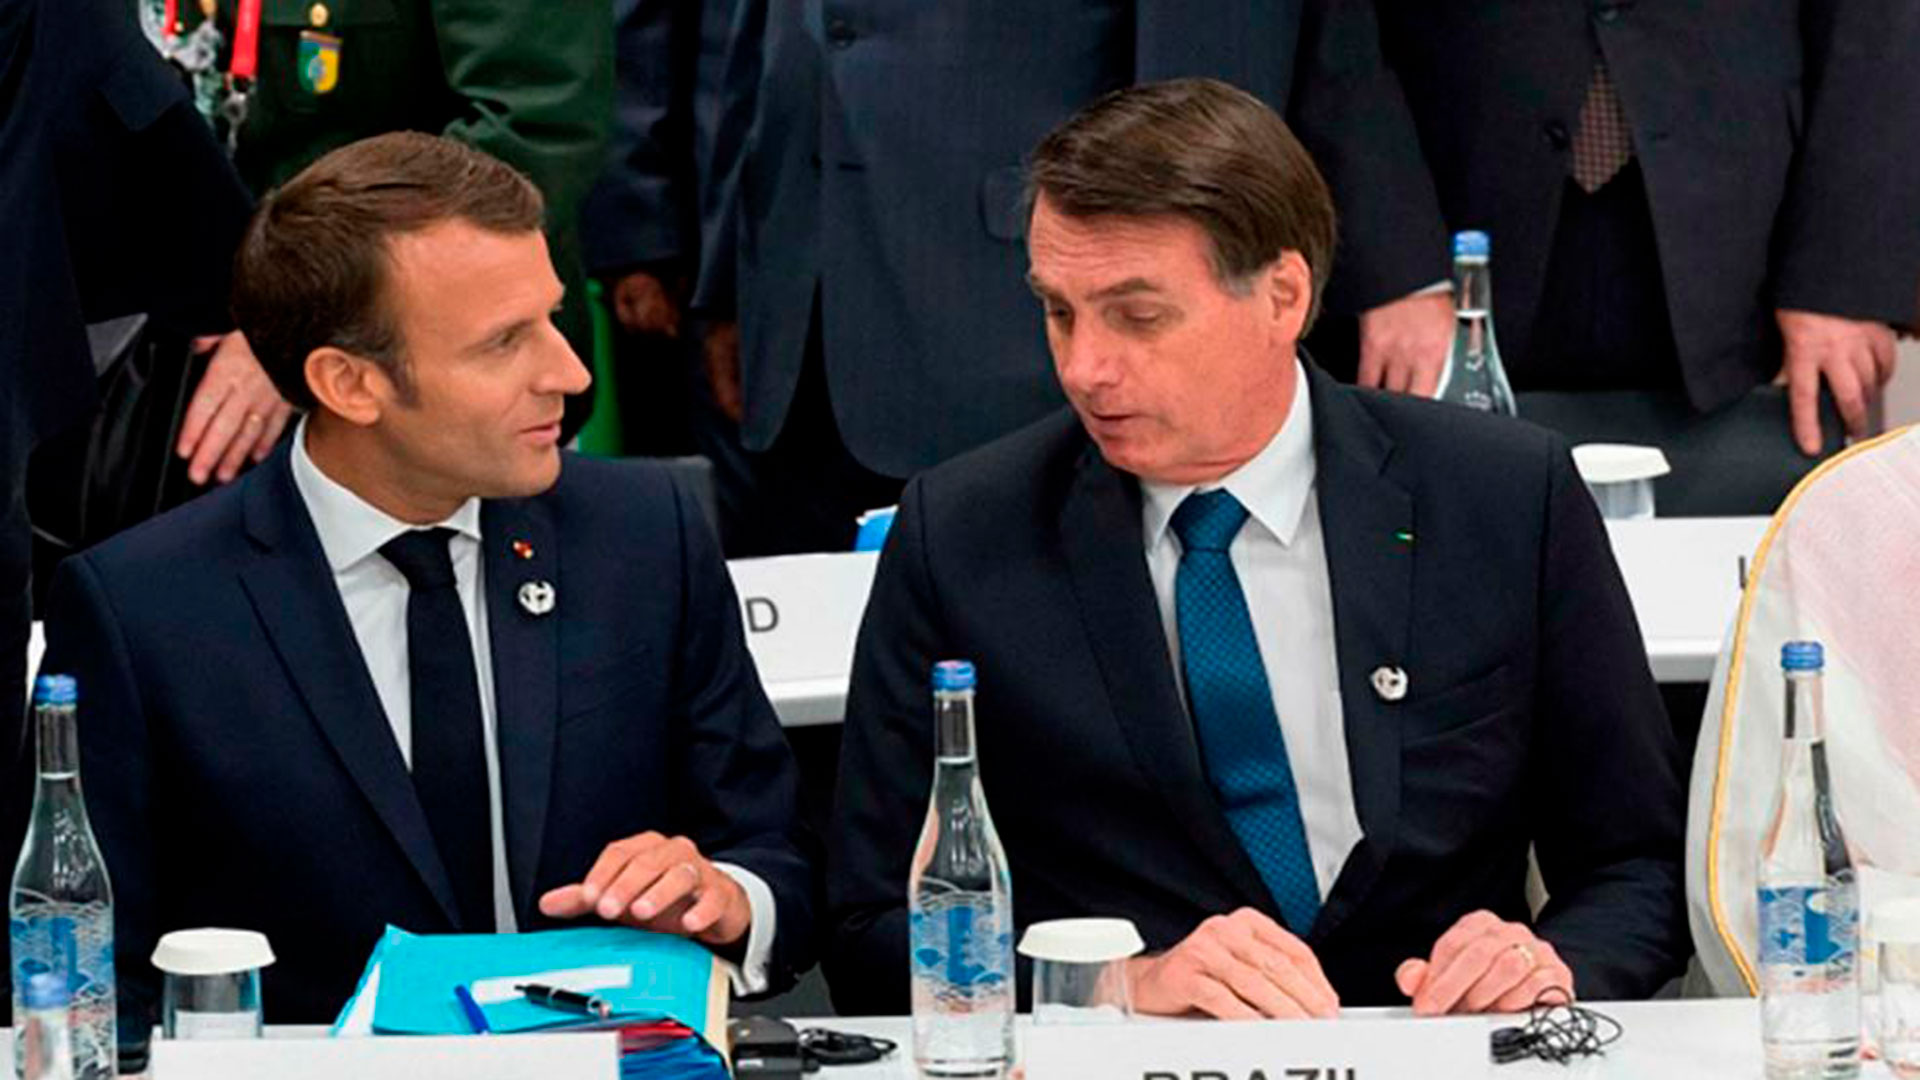 European officials consider that the tensions between Macron and Bolsonaro marked a turning point in the process of the agreement between the EU and Mercosur